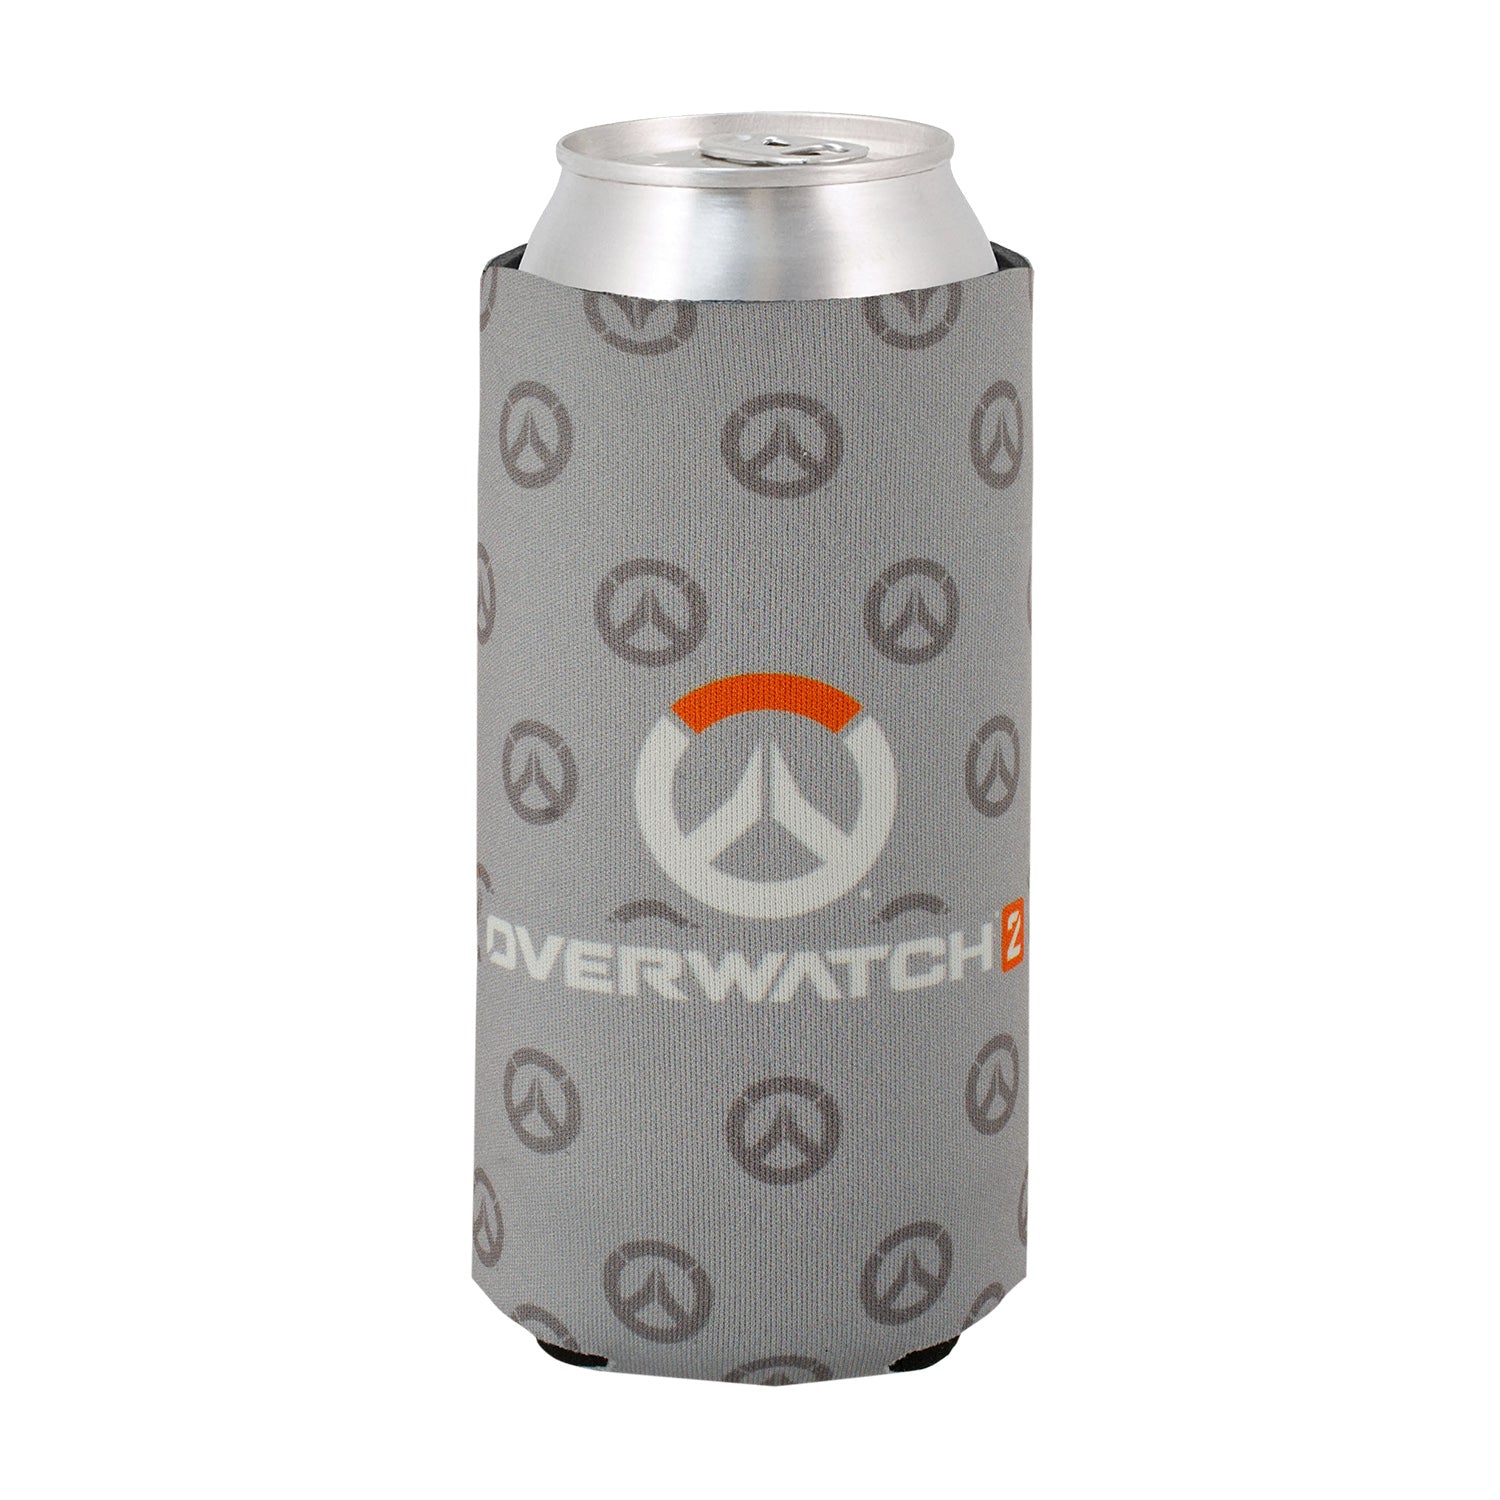 Overwatch 2 16oz Can Cooler - Front View